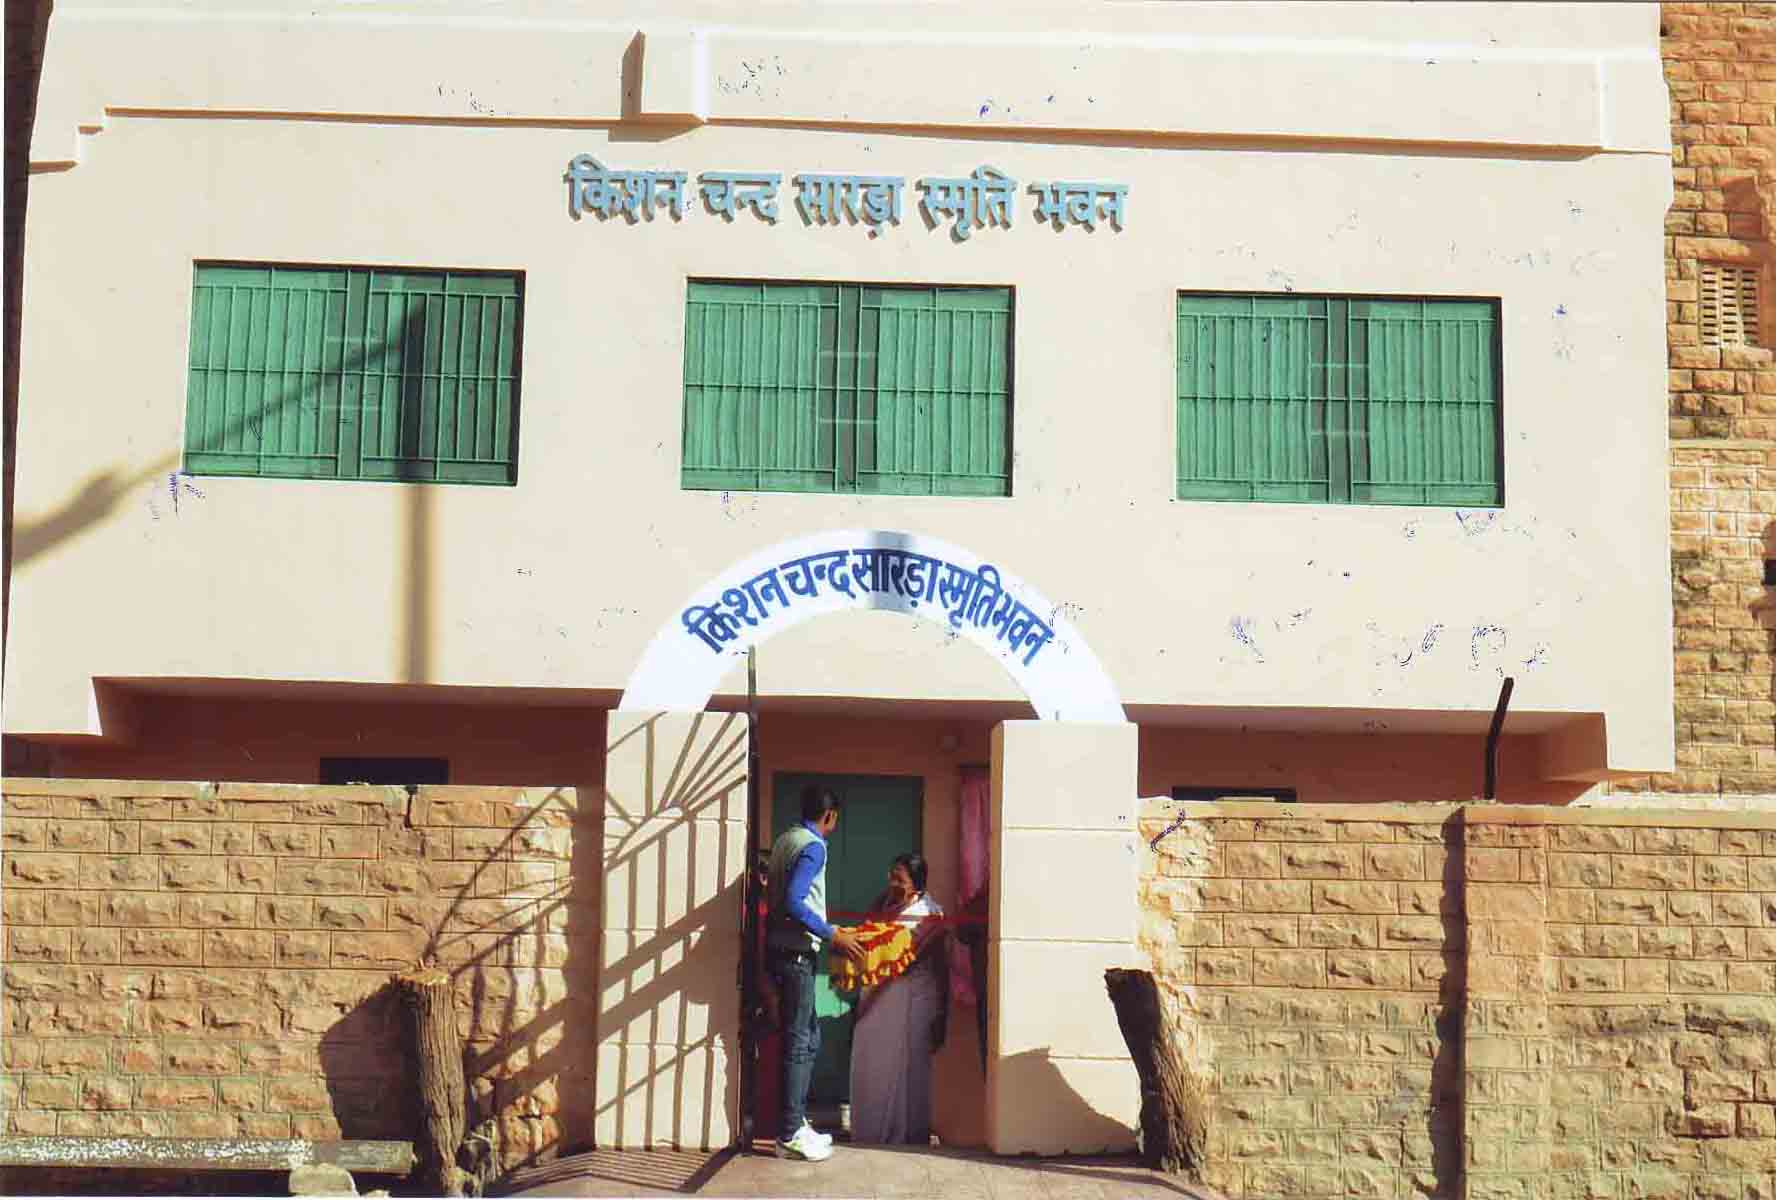 BUILDING DONATED BY SARDA FAMILY